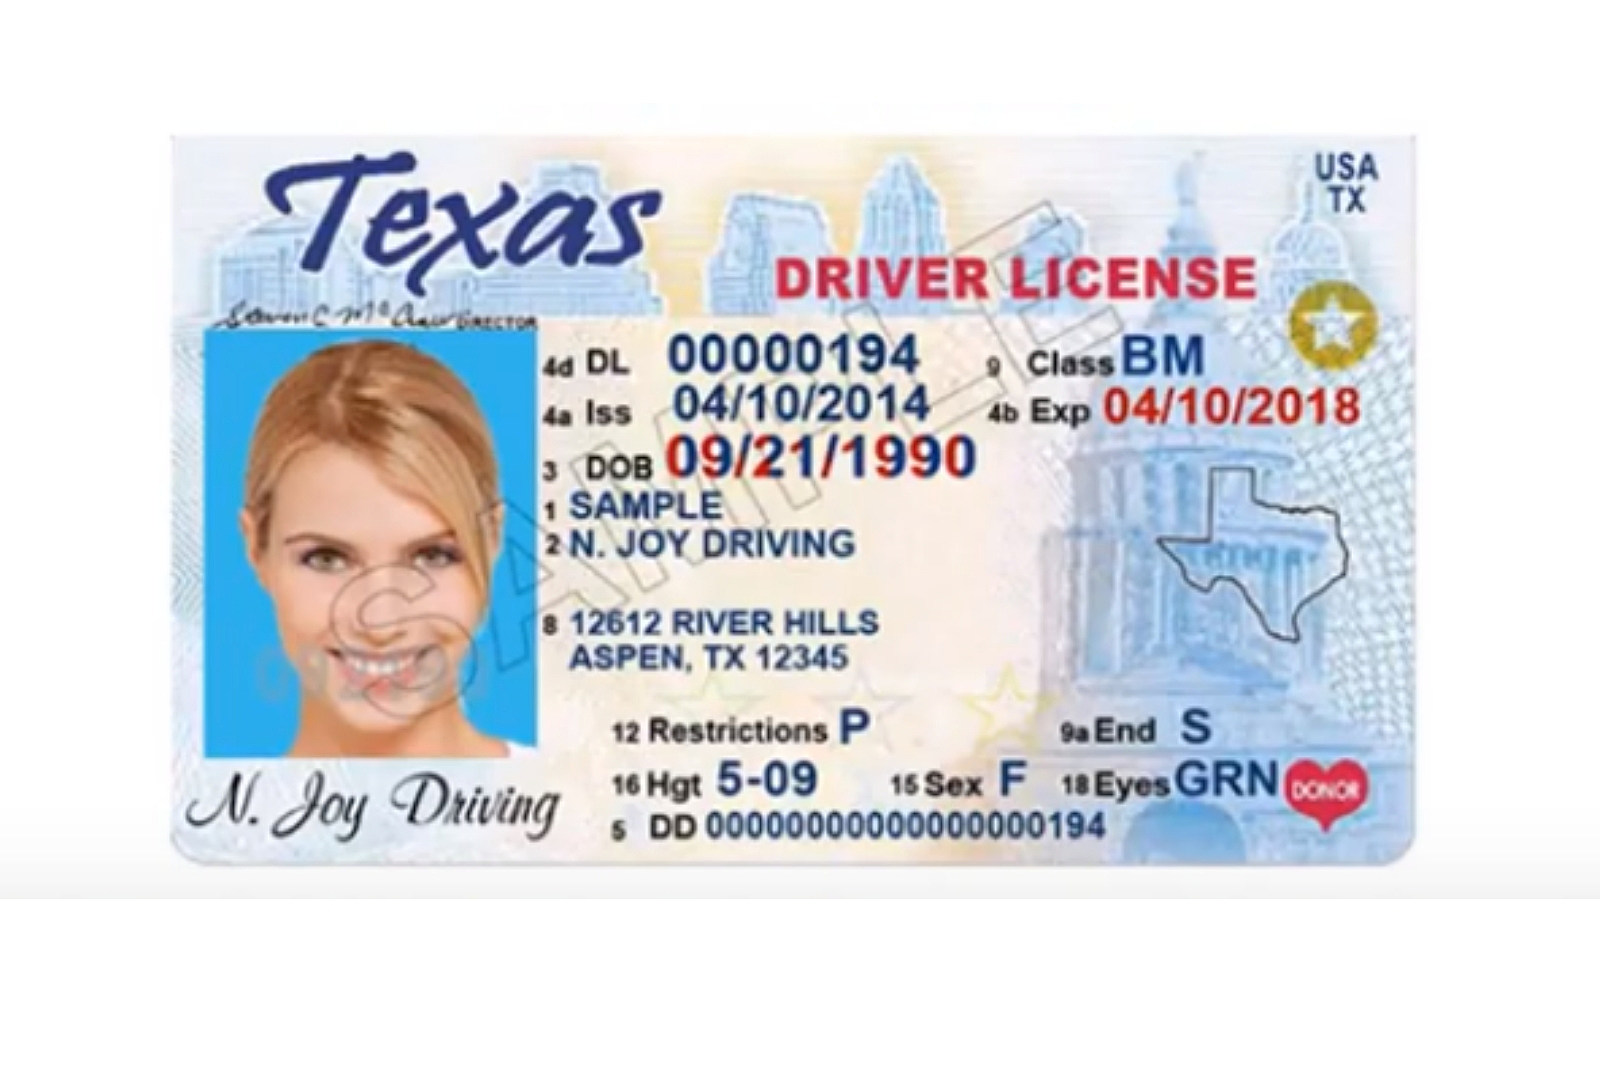 License ended. Driver License. Texas Driver License. Texas Driving License.